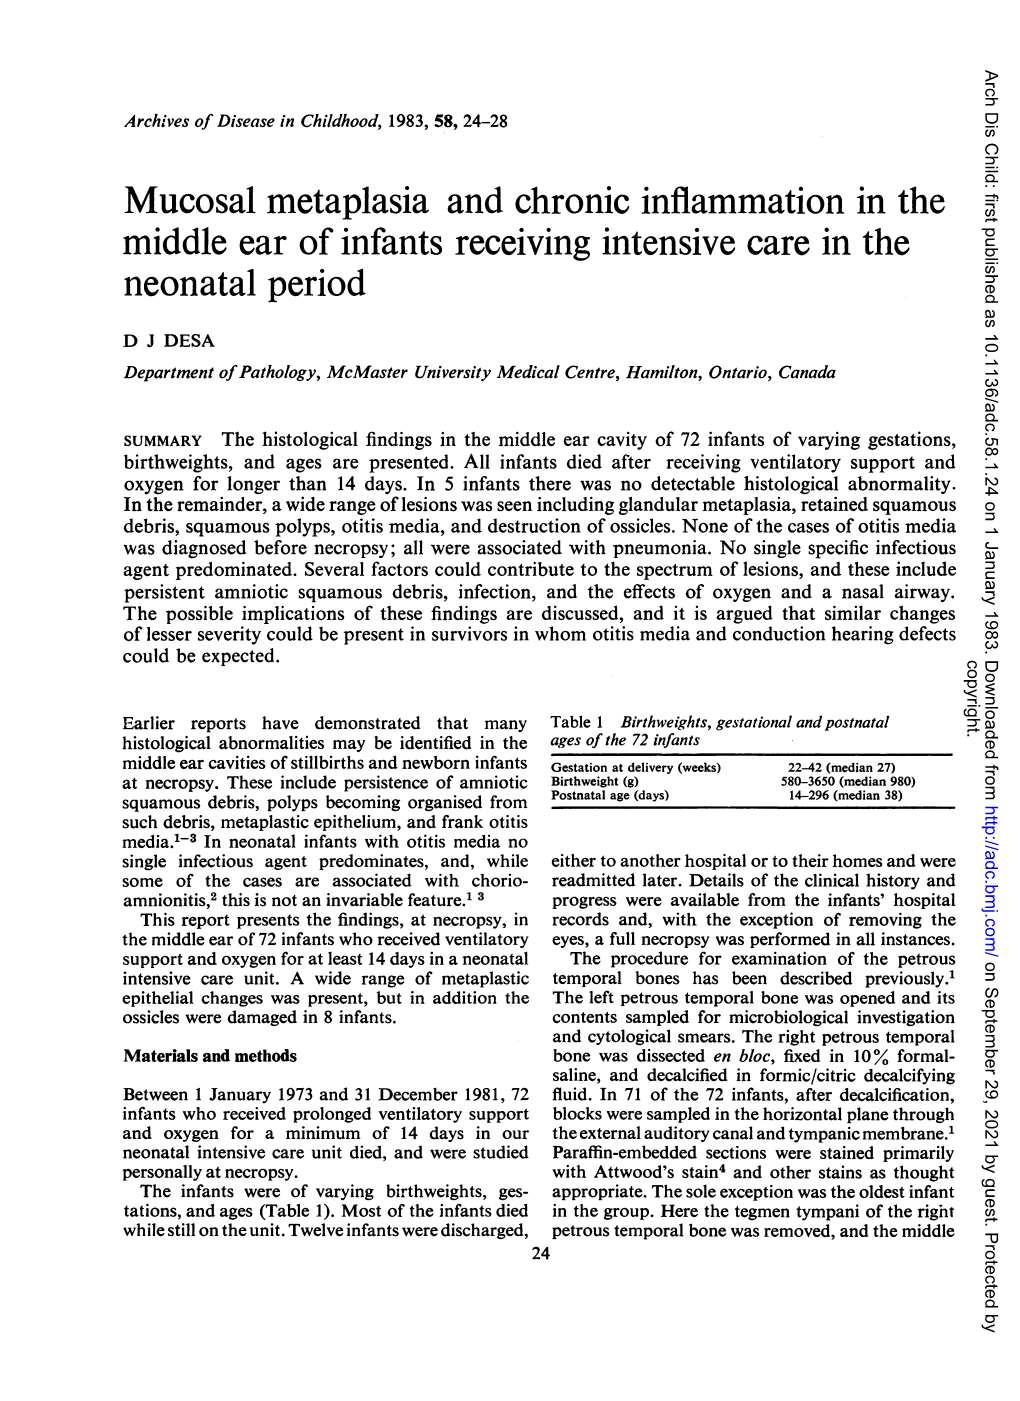 Mucosal Metaplasia and Chronic Inflammation in the Middle Ear of Infants Receiving Intensive Care in the Neonatal Period